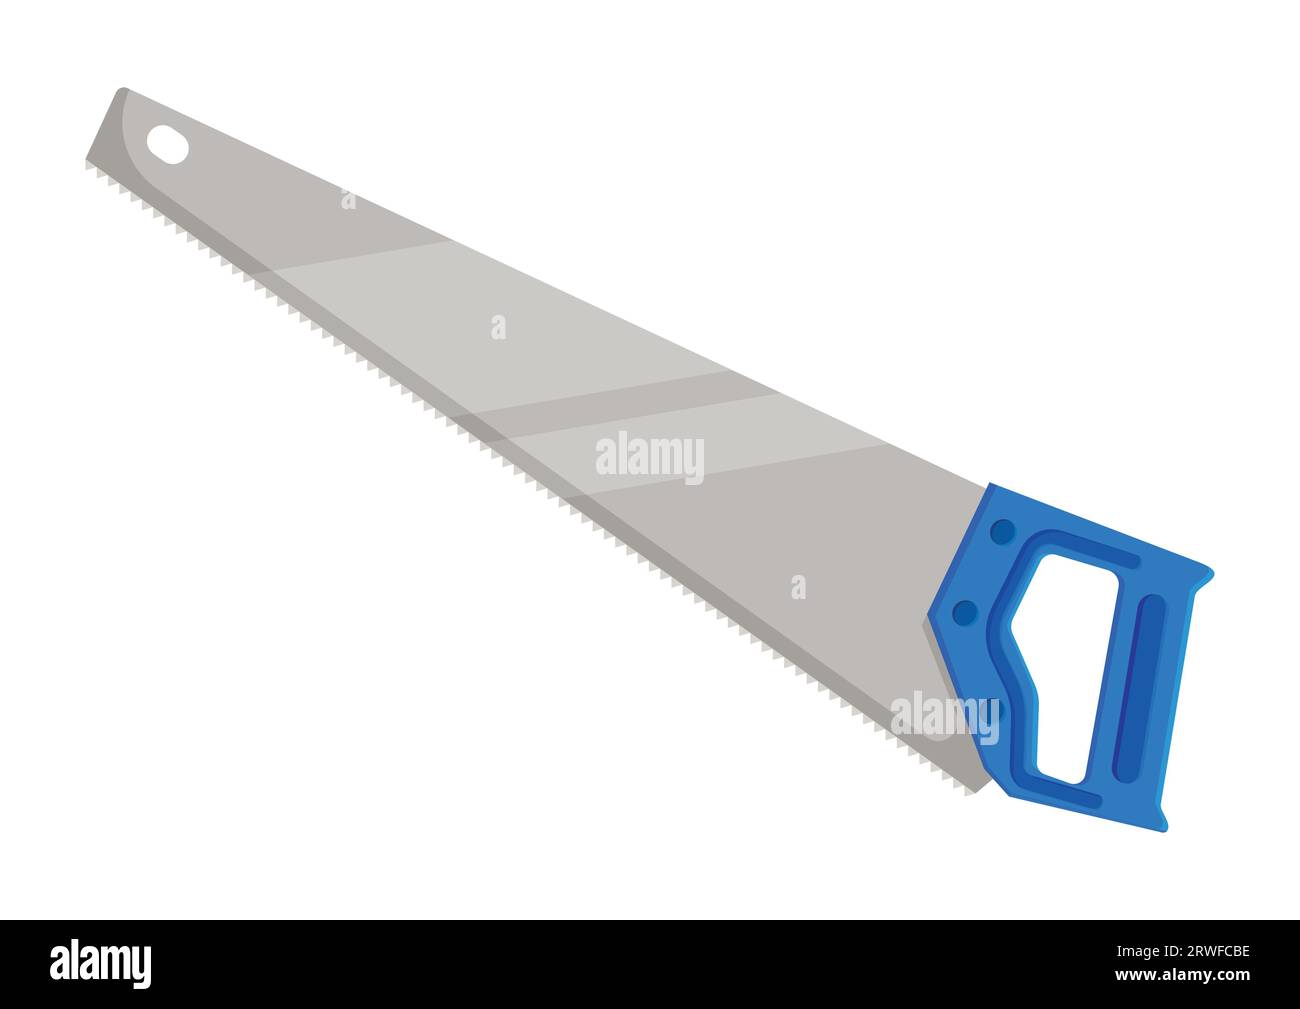 Hand saw work tools clipart vector flat design isolated on white background Stock Vector